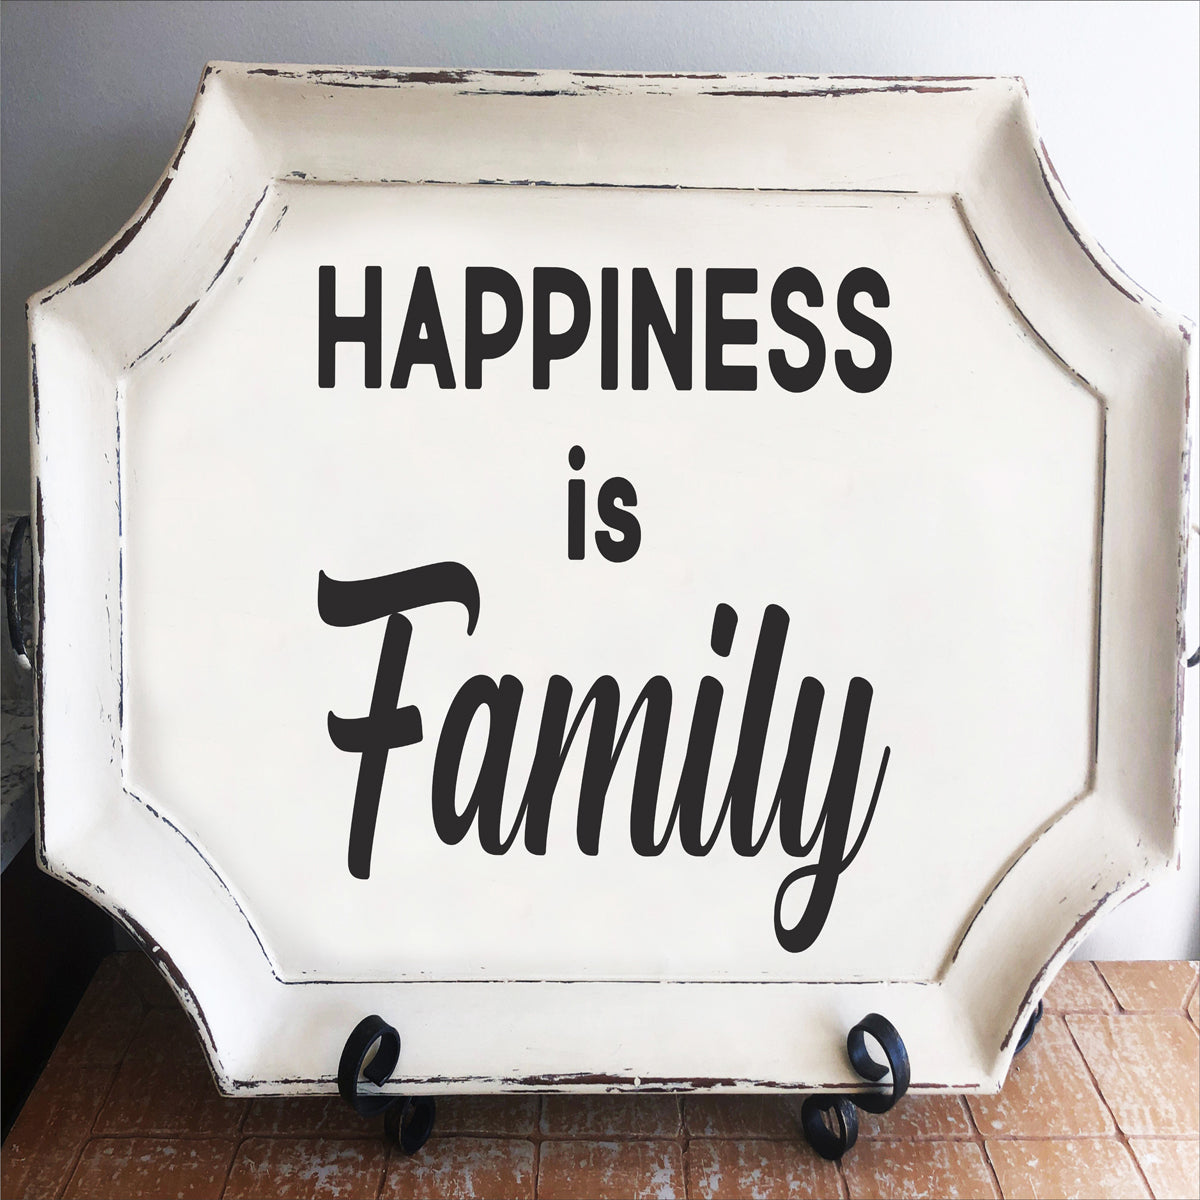 Happiness is Family Stencil 02 - Superior Stencils